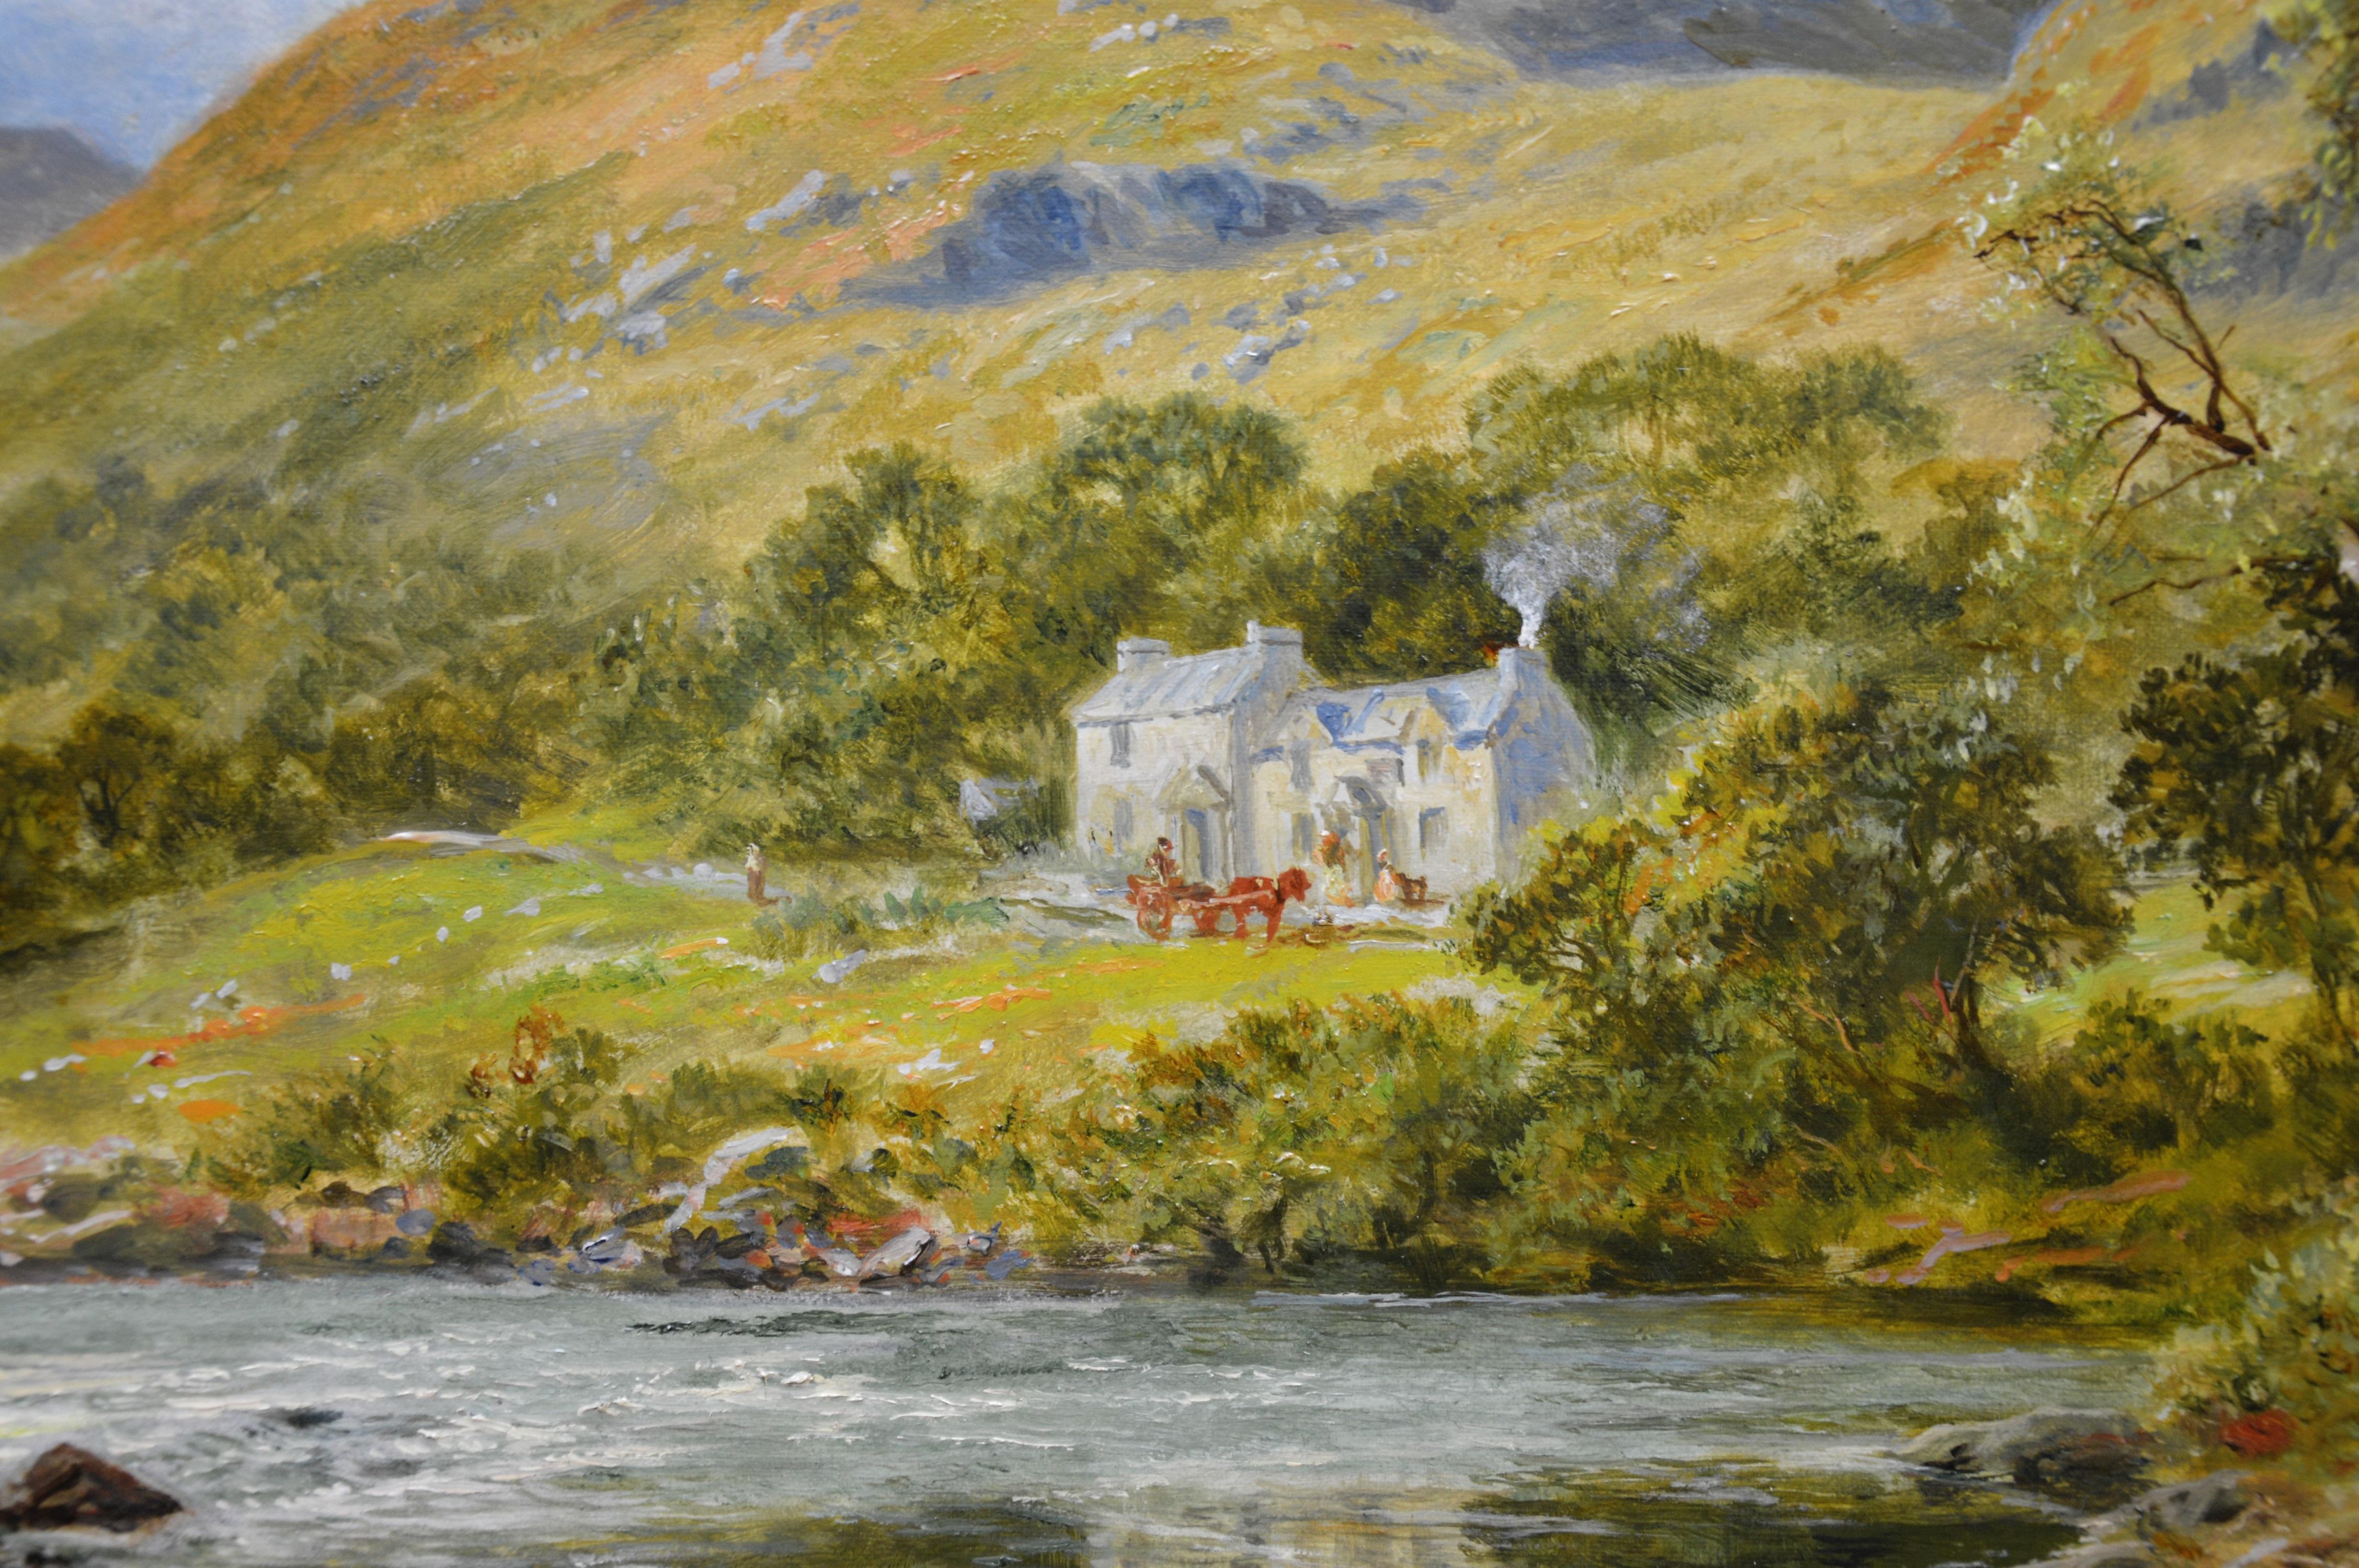 The Fish Inn, Lledr Valley - 19th Century Landscape Oil Painting River Fishing 3